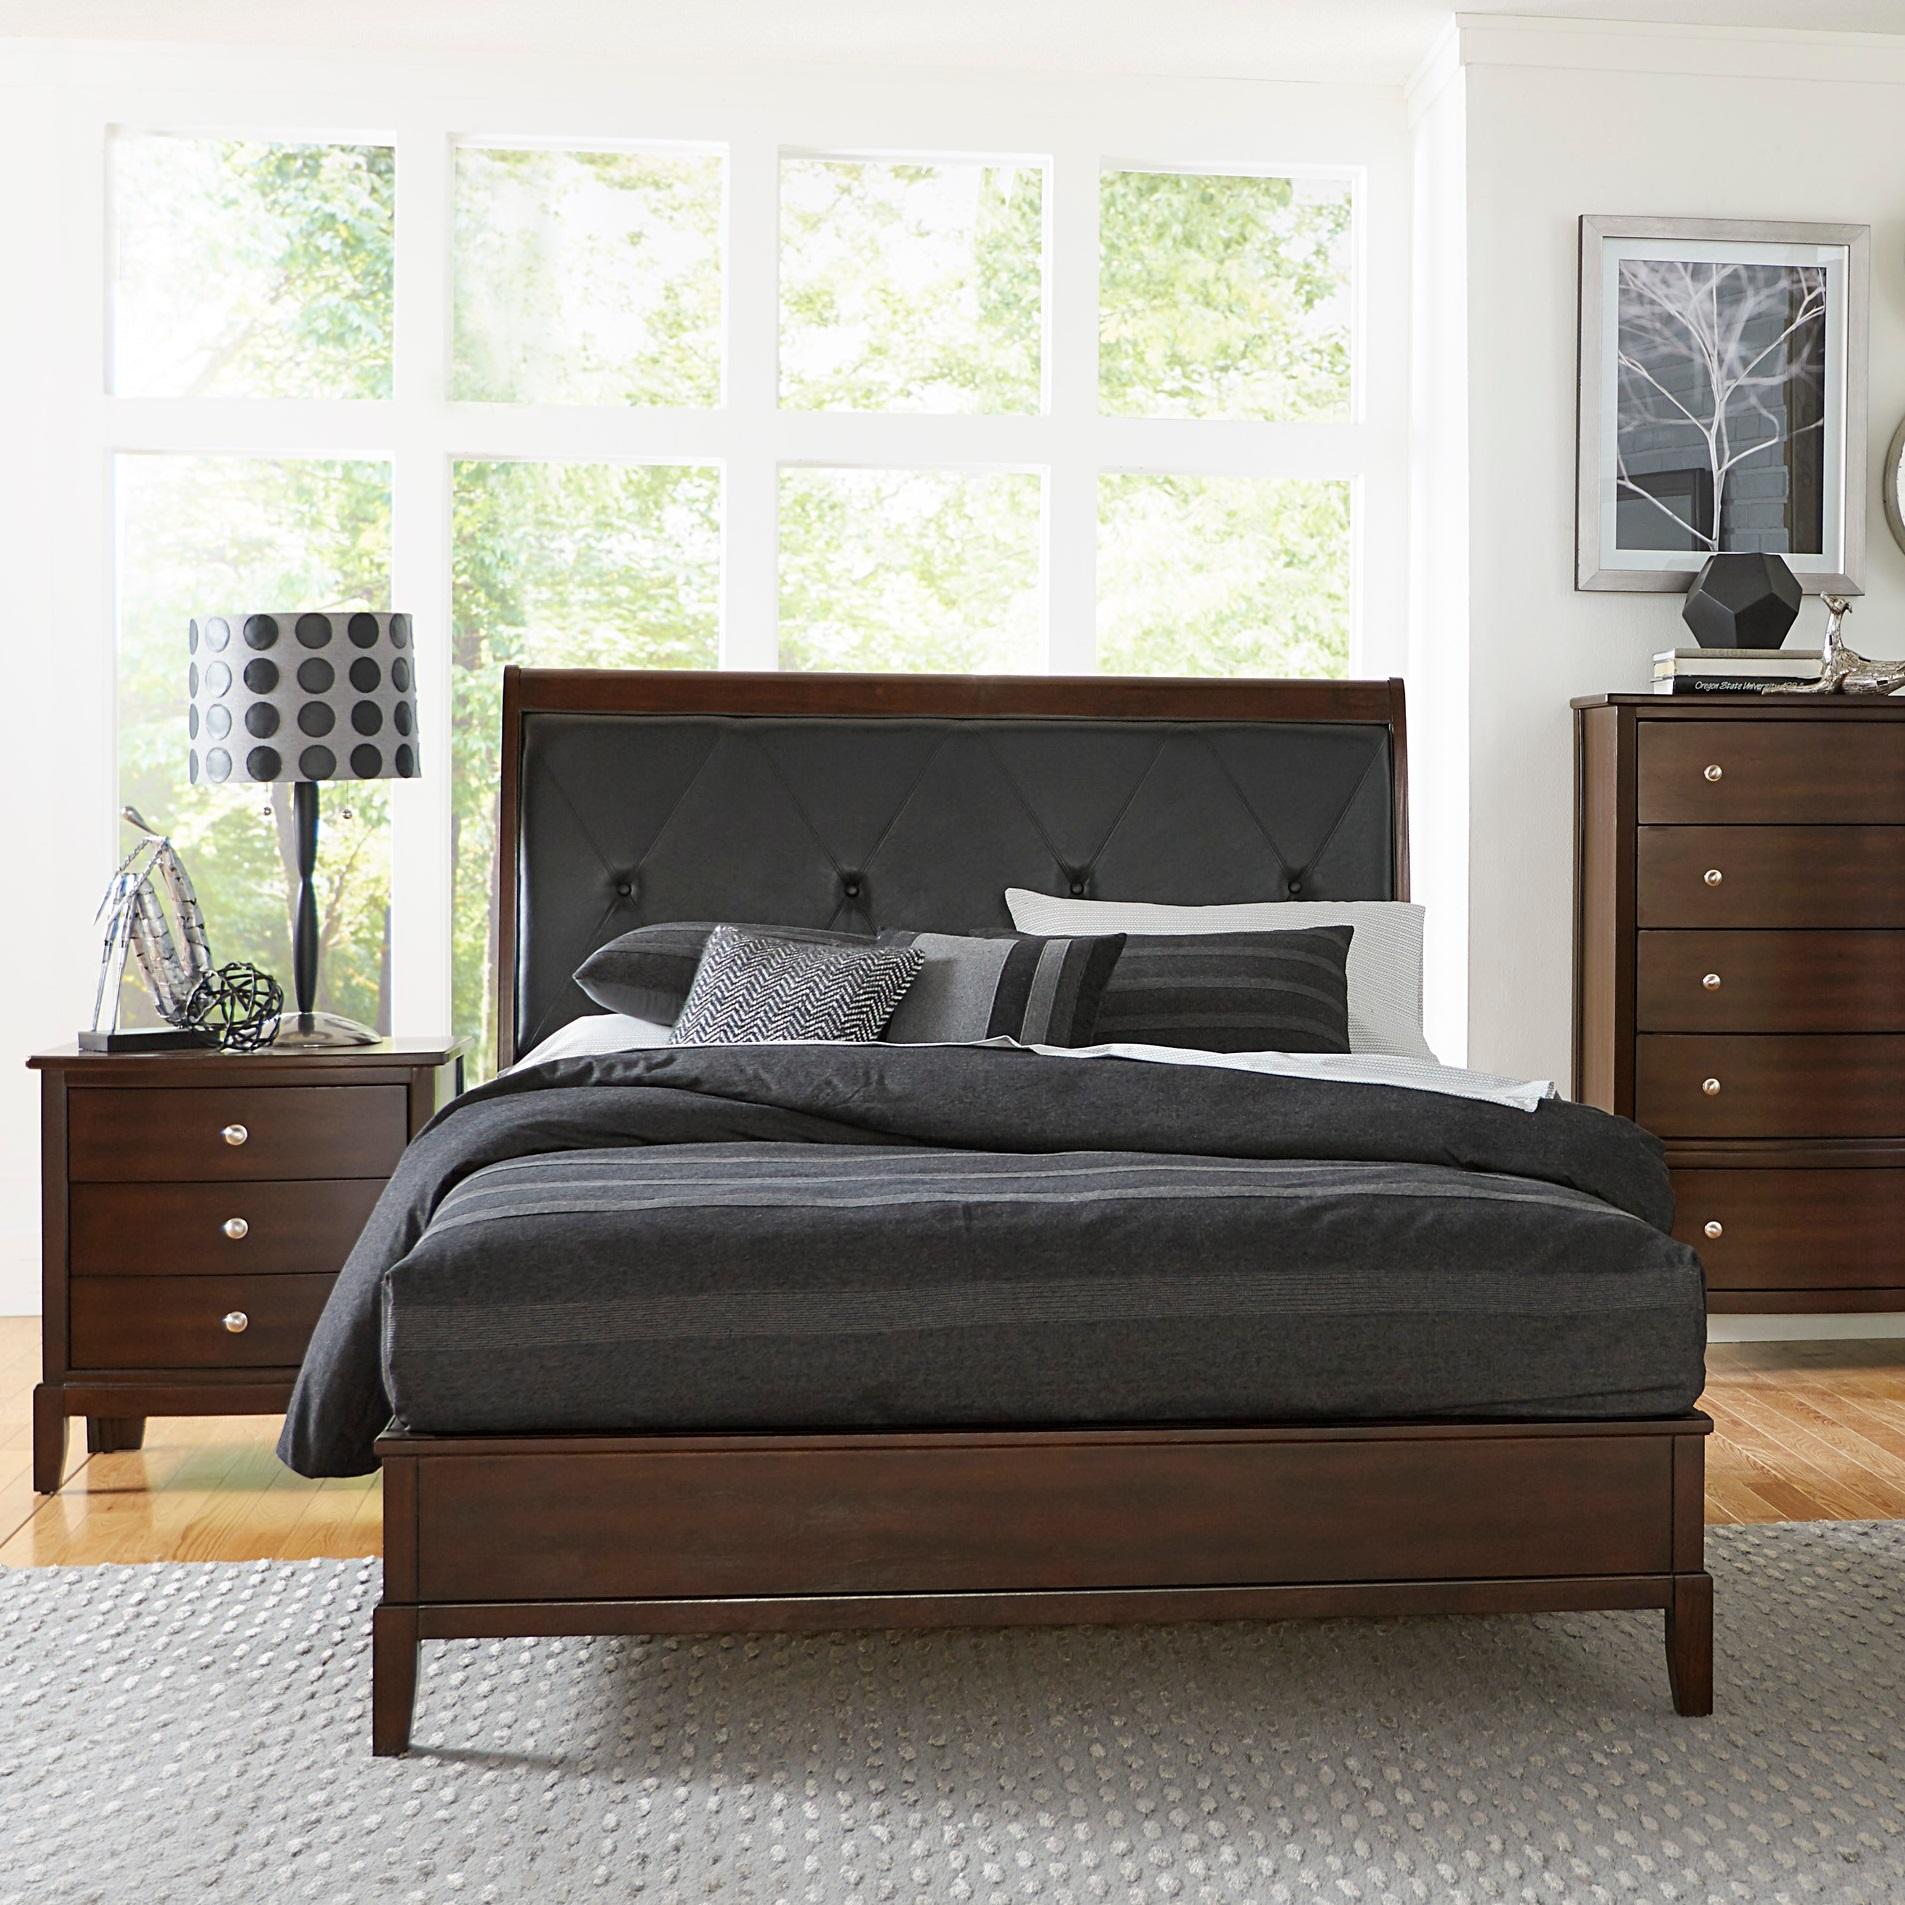 Transitional Bedroom Set 1730K-1CK-3PC Cotterill 1730K-1CK-3PC in Dark Cherry Faux Leather